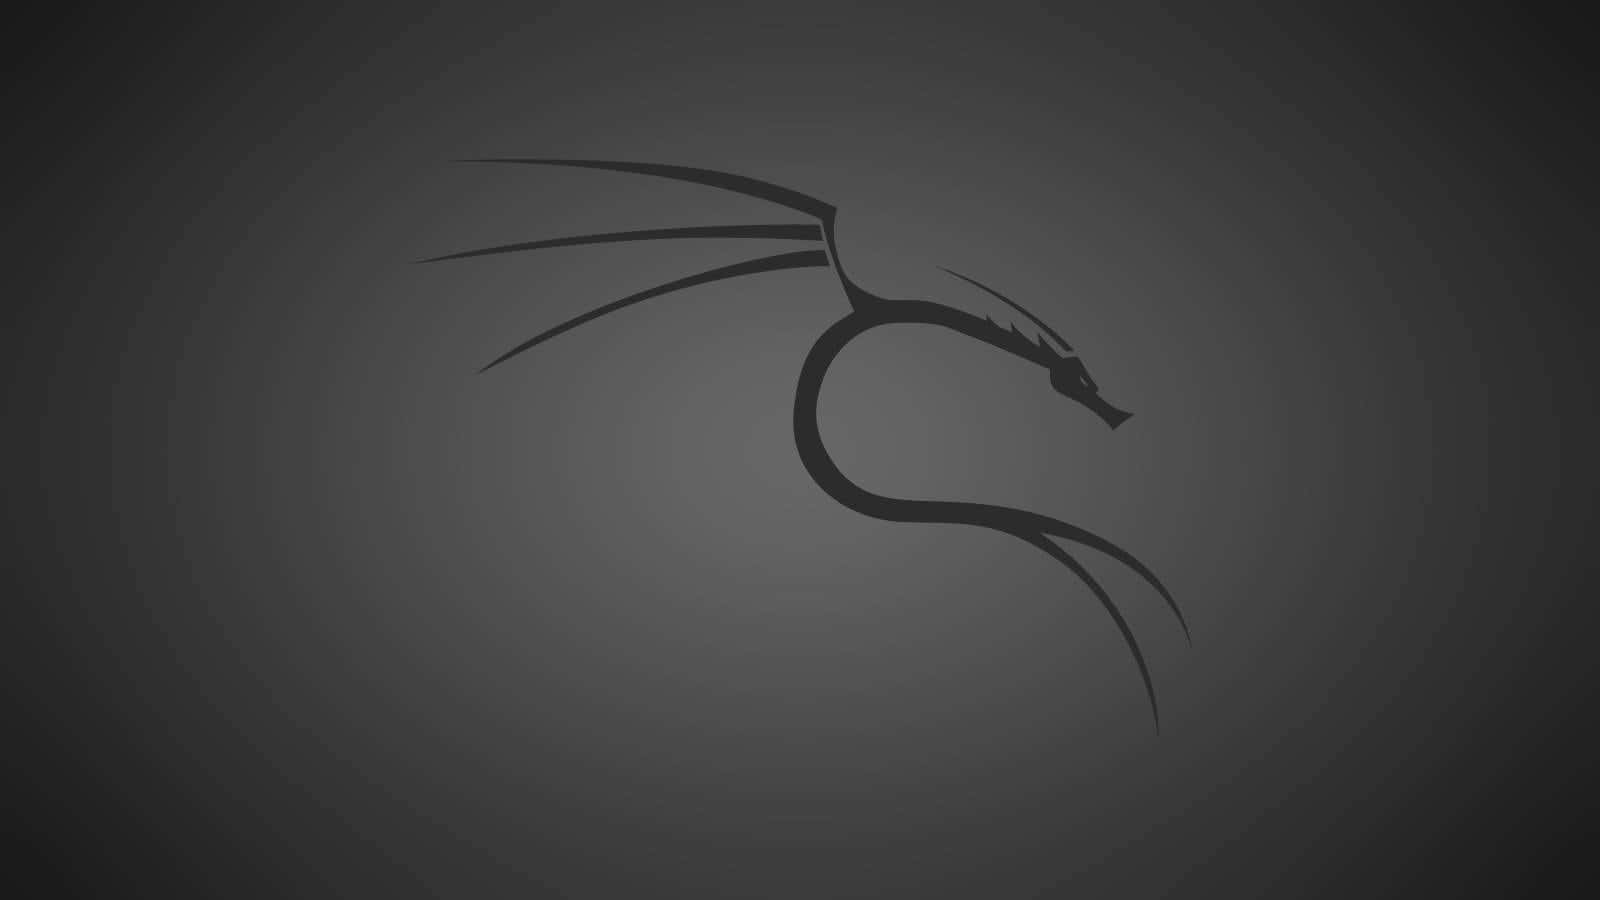 The official background of Kali Linux